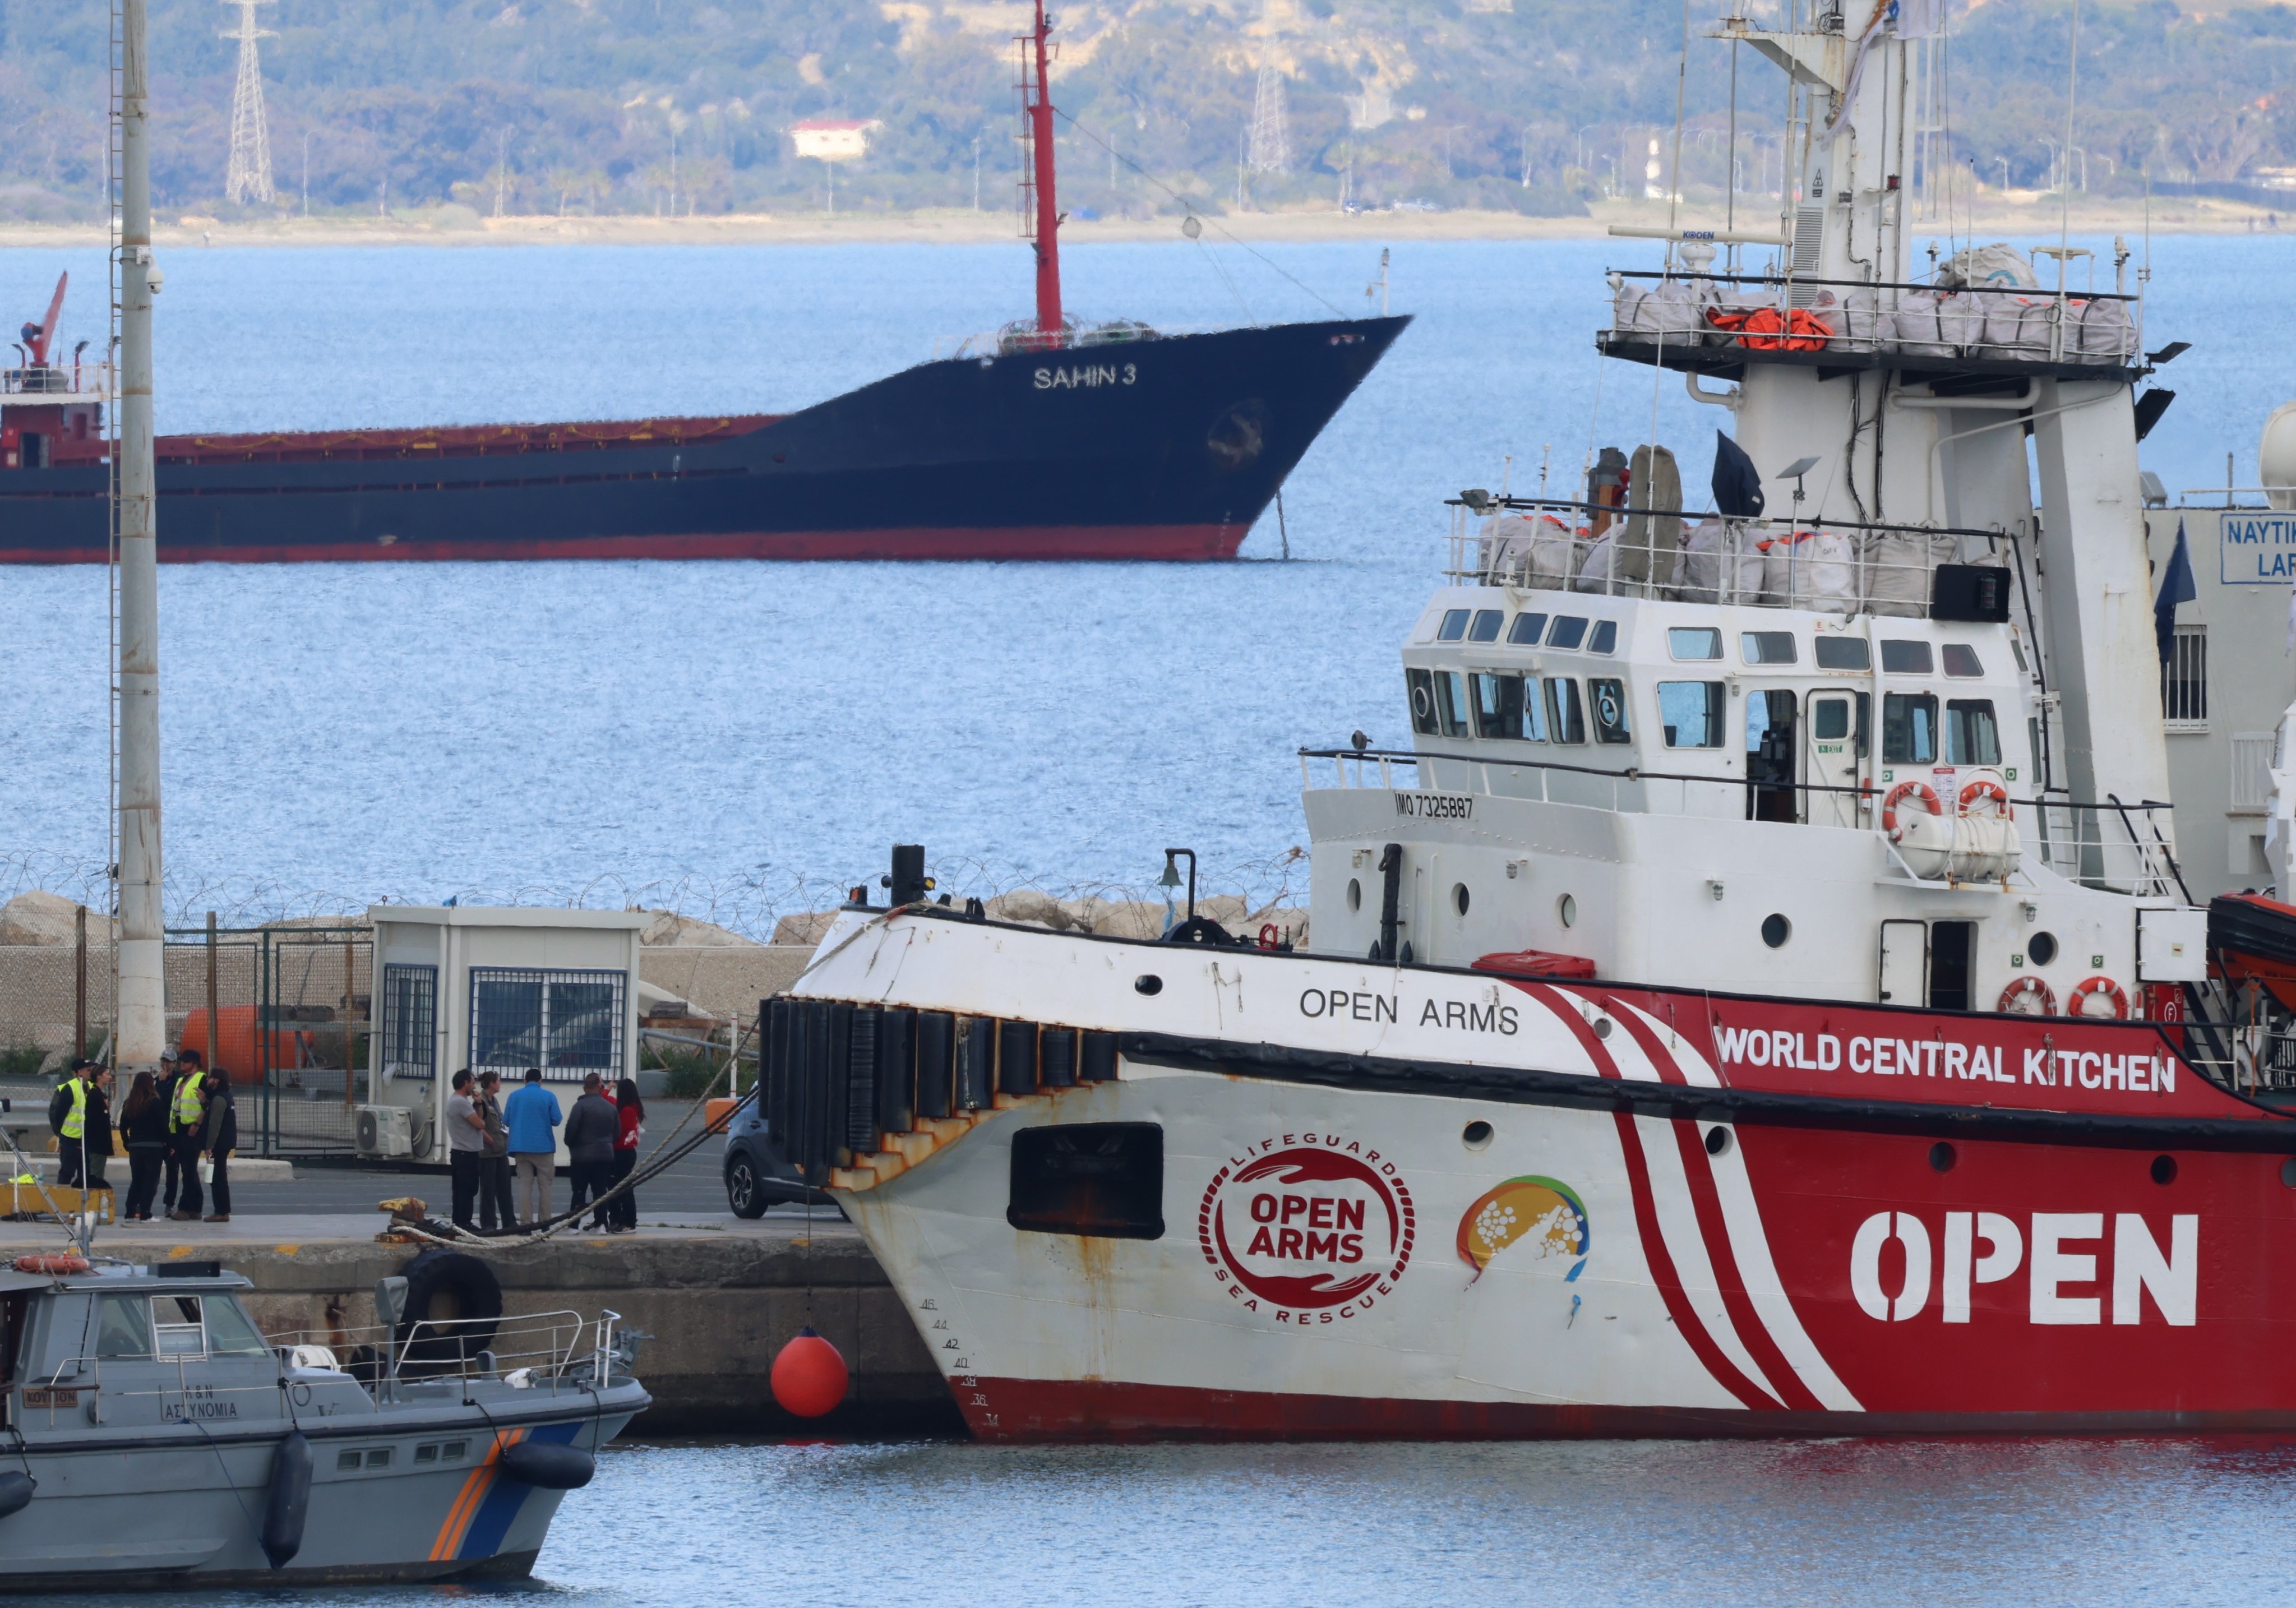 The Open Arms rescue boat in Cyprus on Sunday. Photo: EPA-EFE